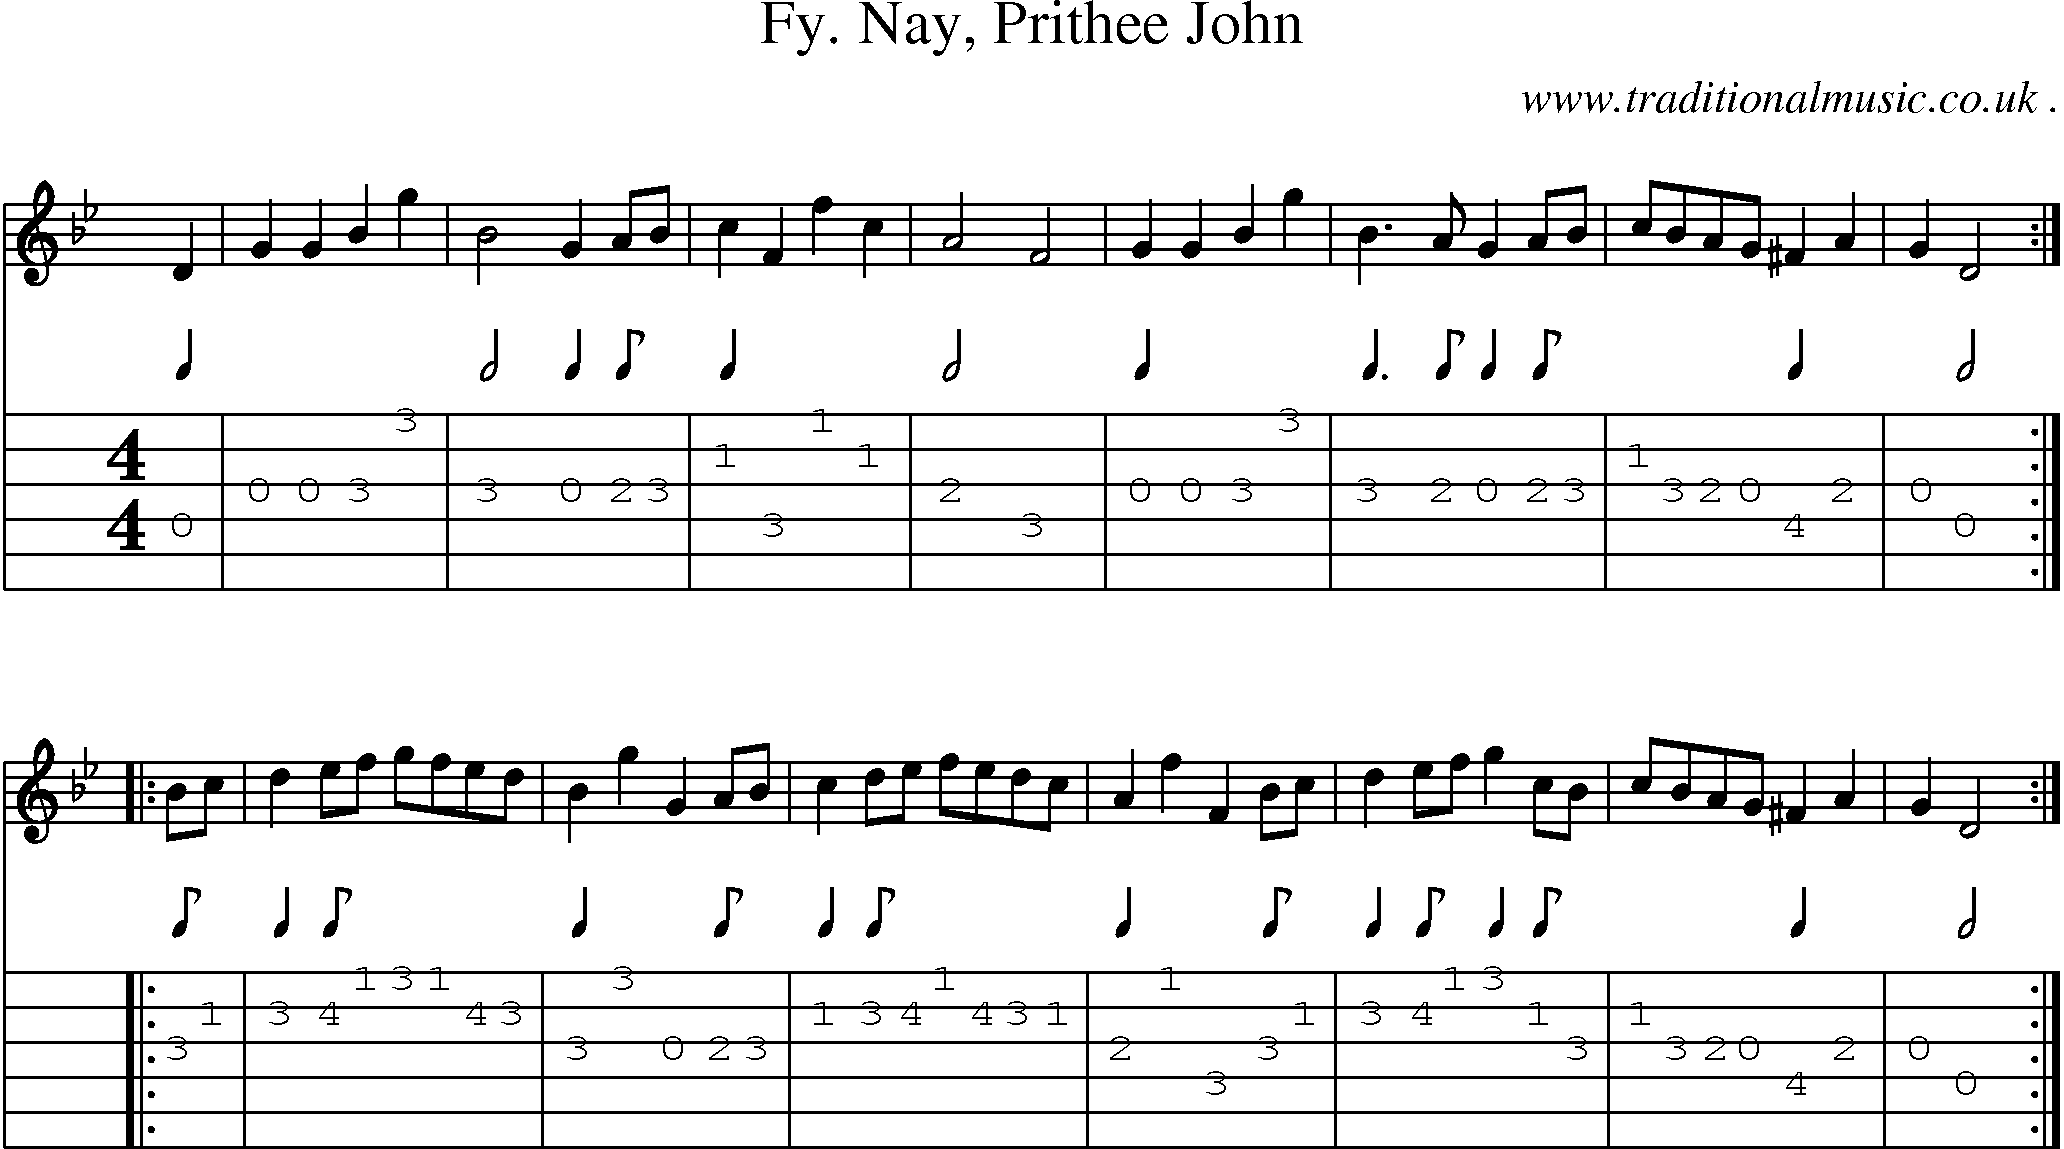 Sheet-Music and Guitar Tabs for Fy Nay Prithee John